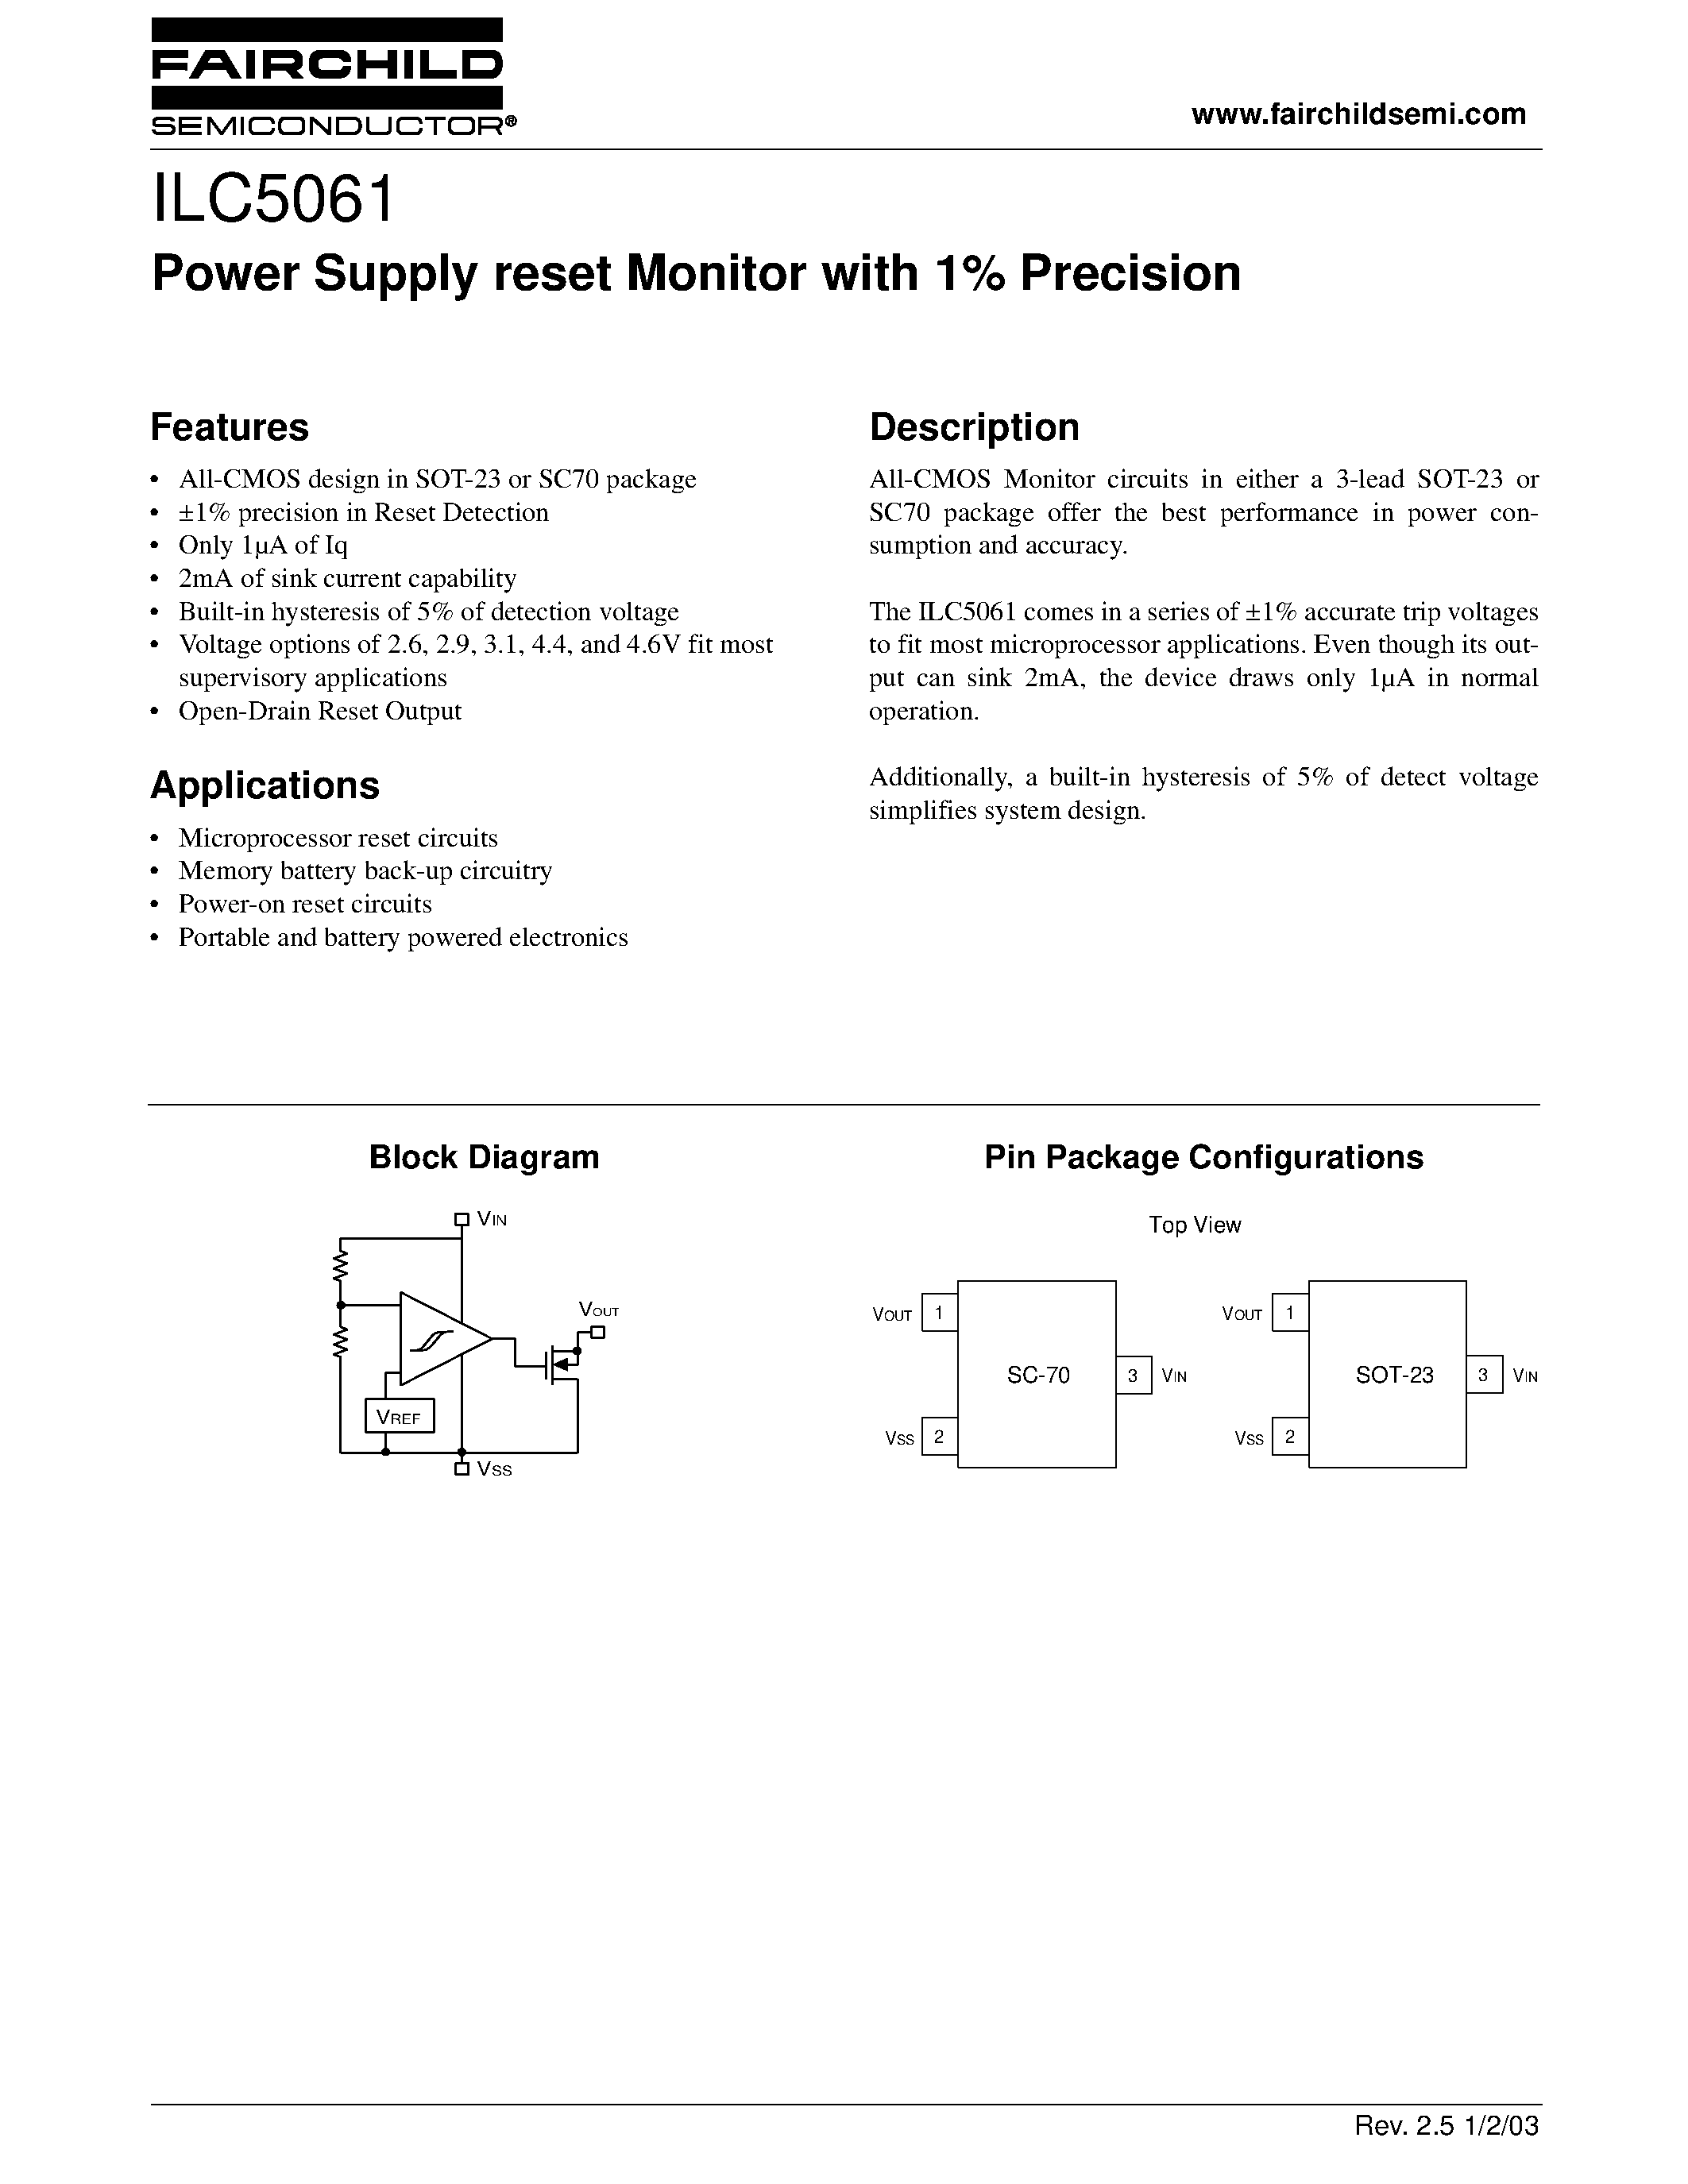 Datasheet ILC5061 - Power Supply reset Monitor with 1% Precision page 1